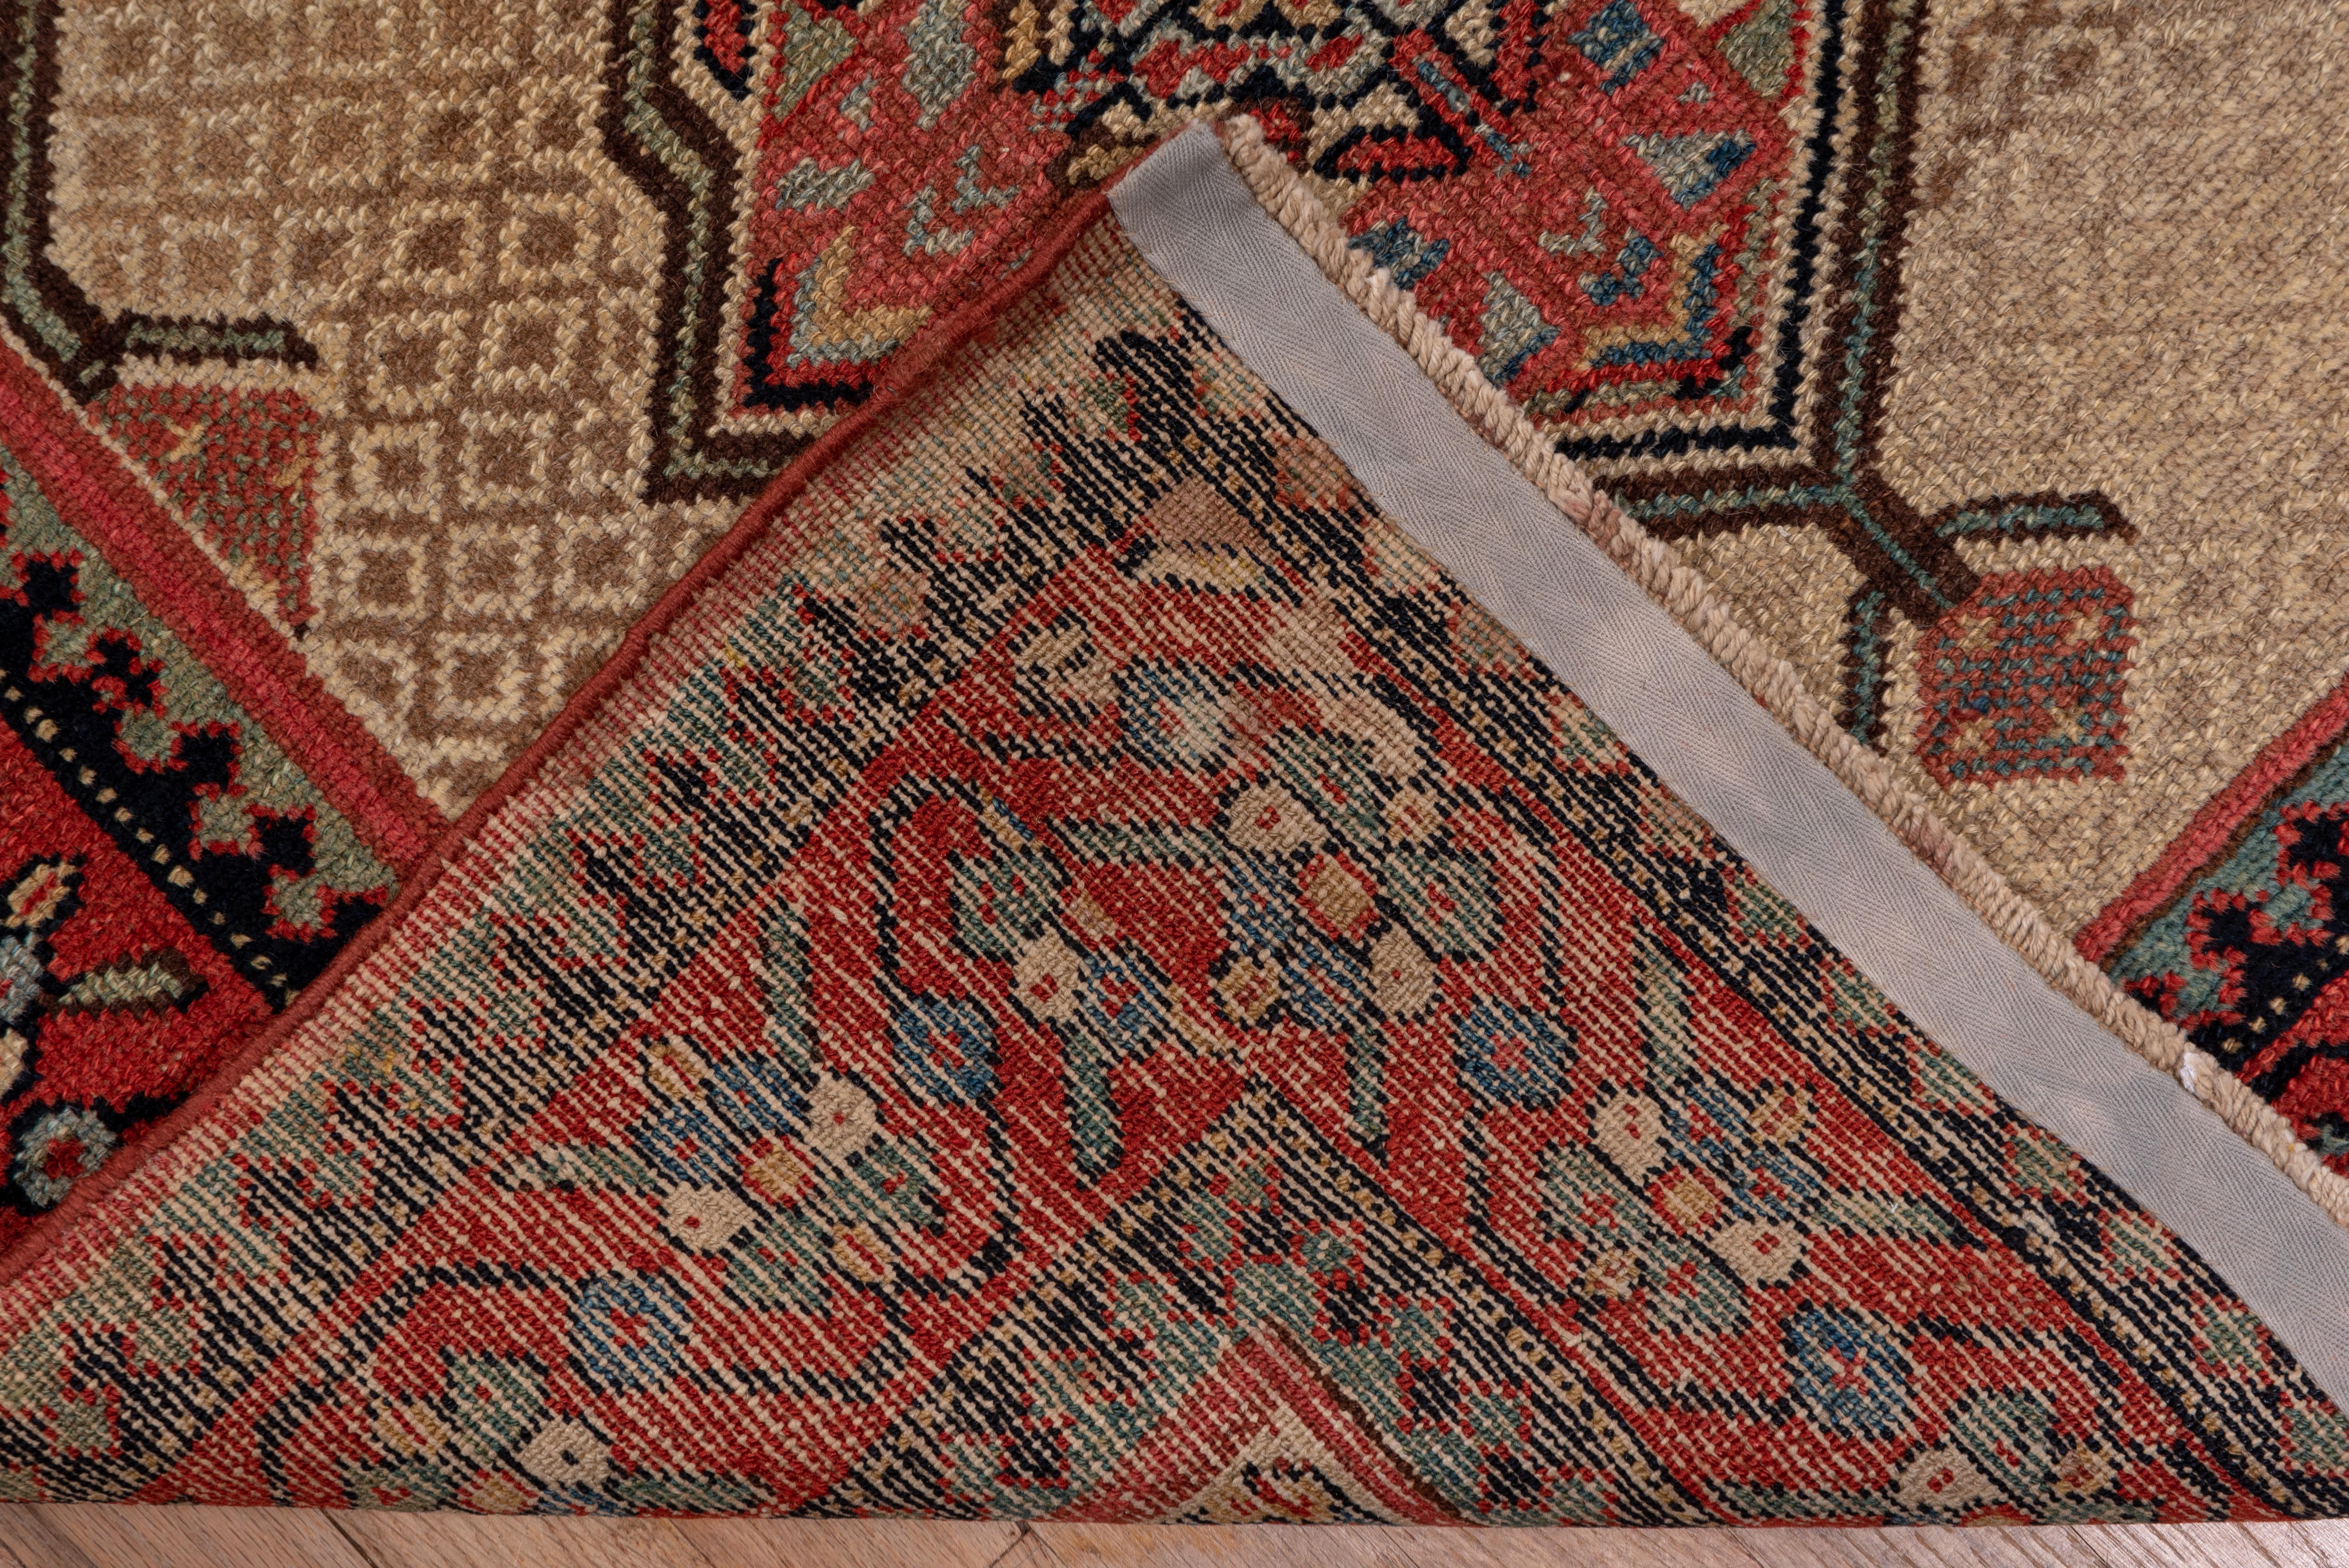 Seven geometric, pointed medallions with four radiating palmettes around cross centers, float easily on the two tone camel field with fractional fillers at sides and corners. Red border with reversing winged palmettes. Medium rustic weave on cotton.